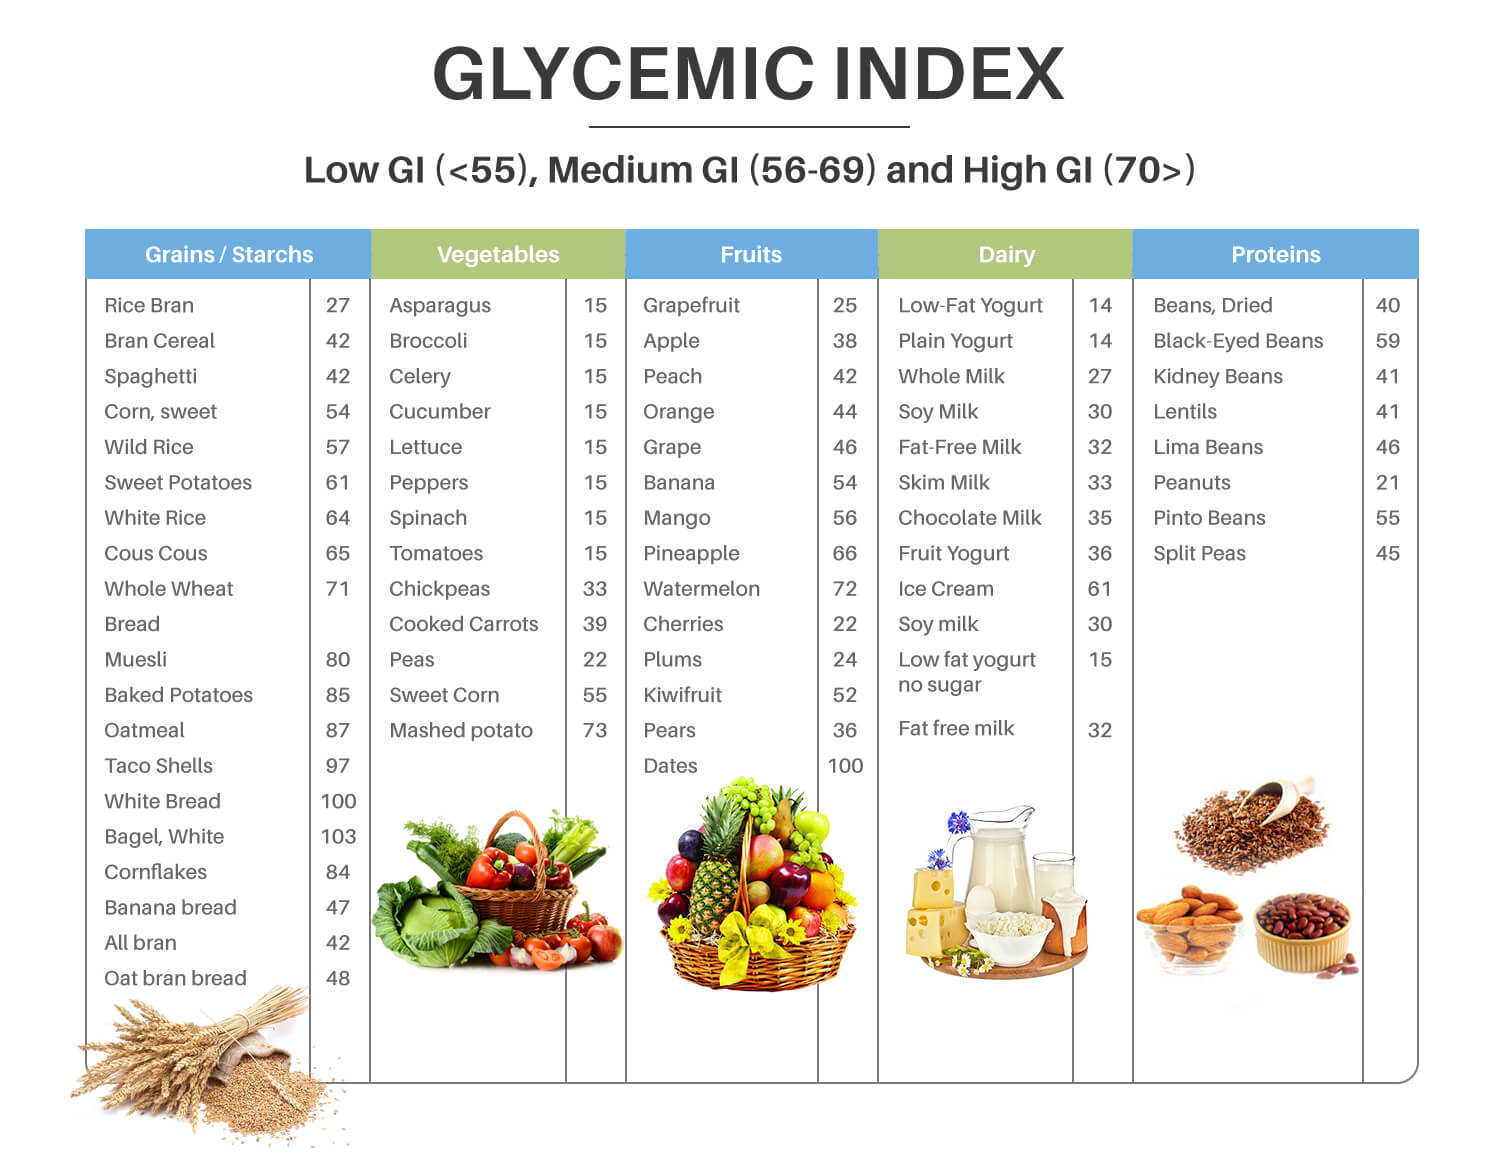 Glycemic Index Classification of Foods Chart